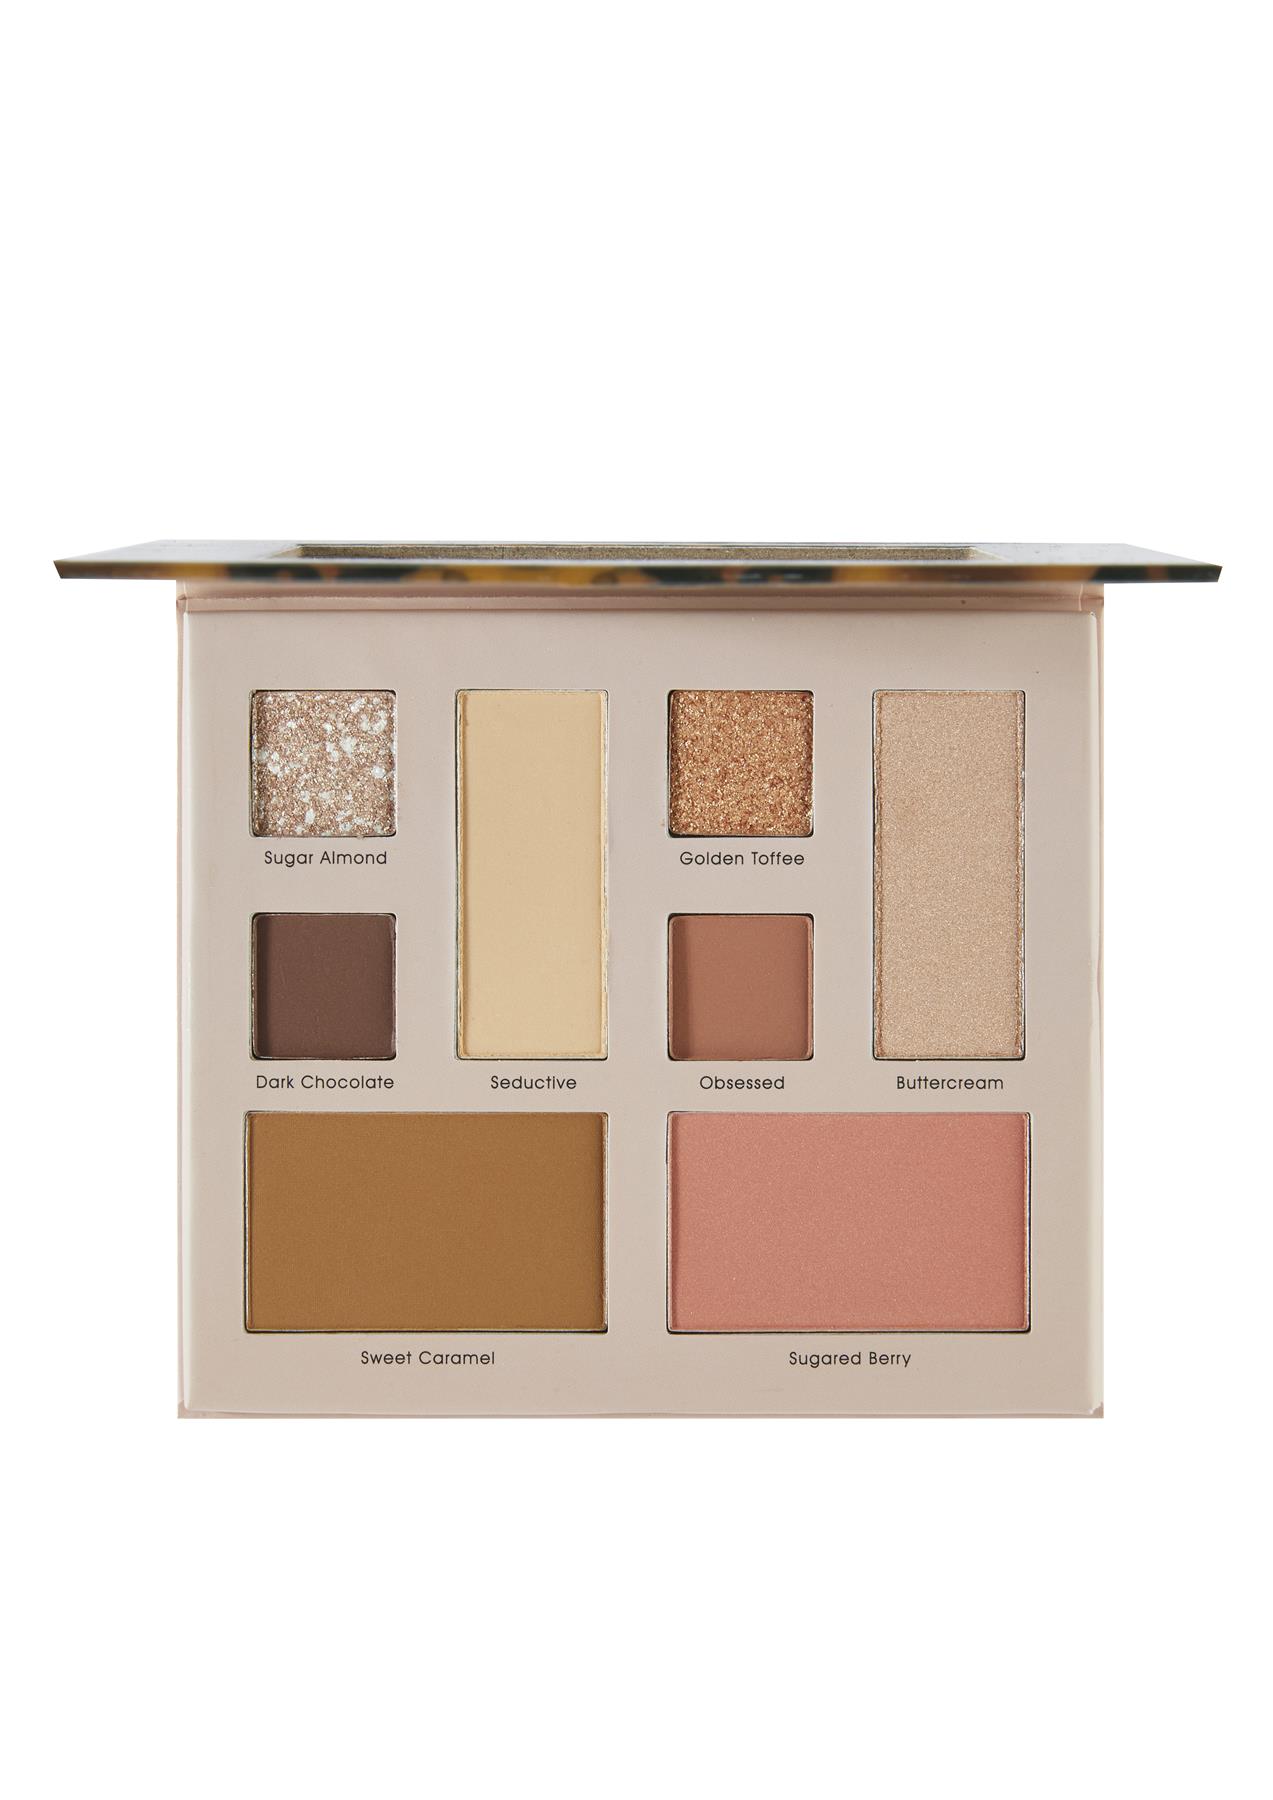 Sunkissed Bronze Fascination Face Palette - 4 x 0.9g Eyeshadow, 2.4g Face Powder, 2.4g Highlighter,... from Perfume Plus Direct